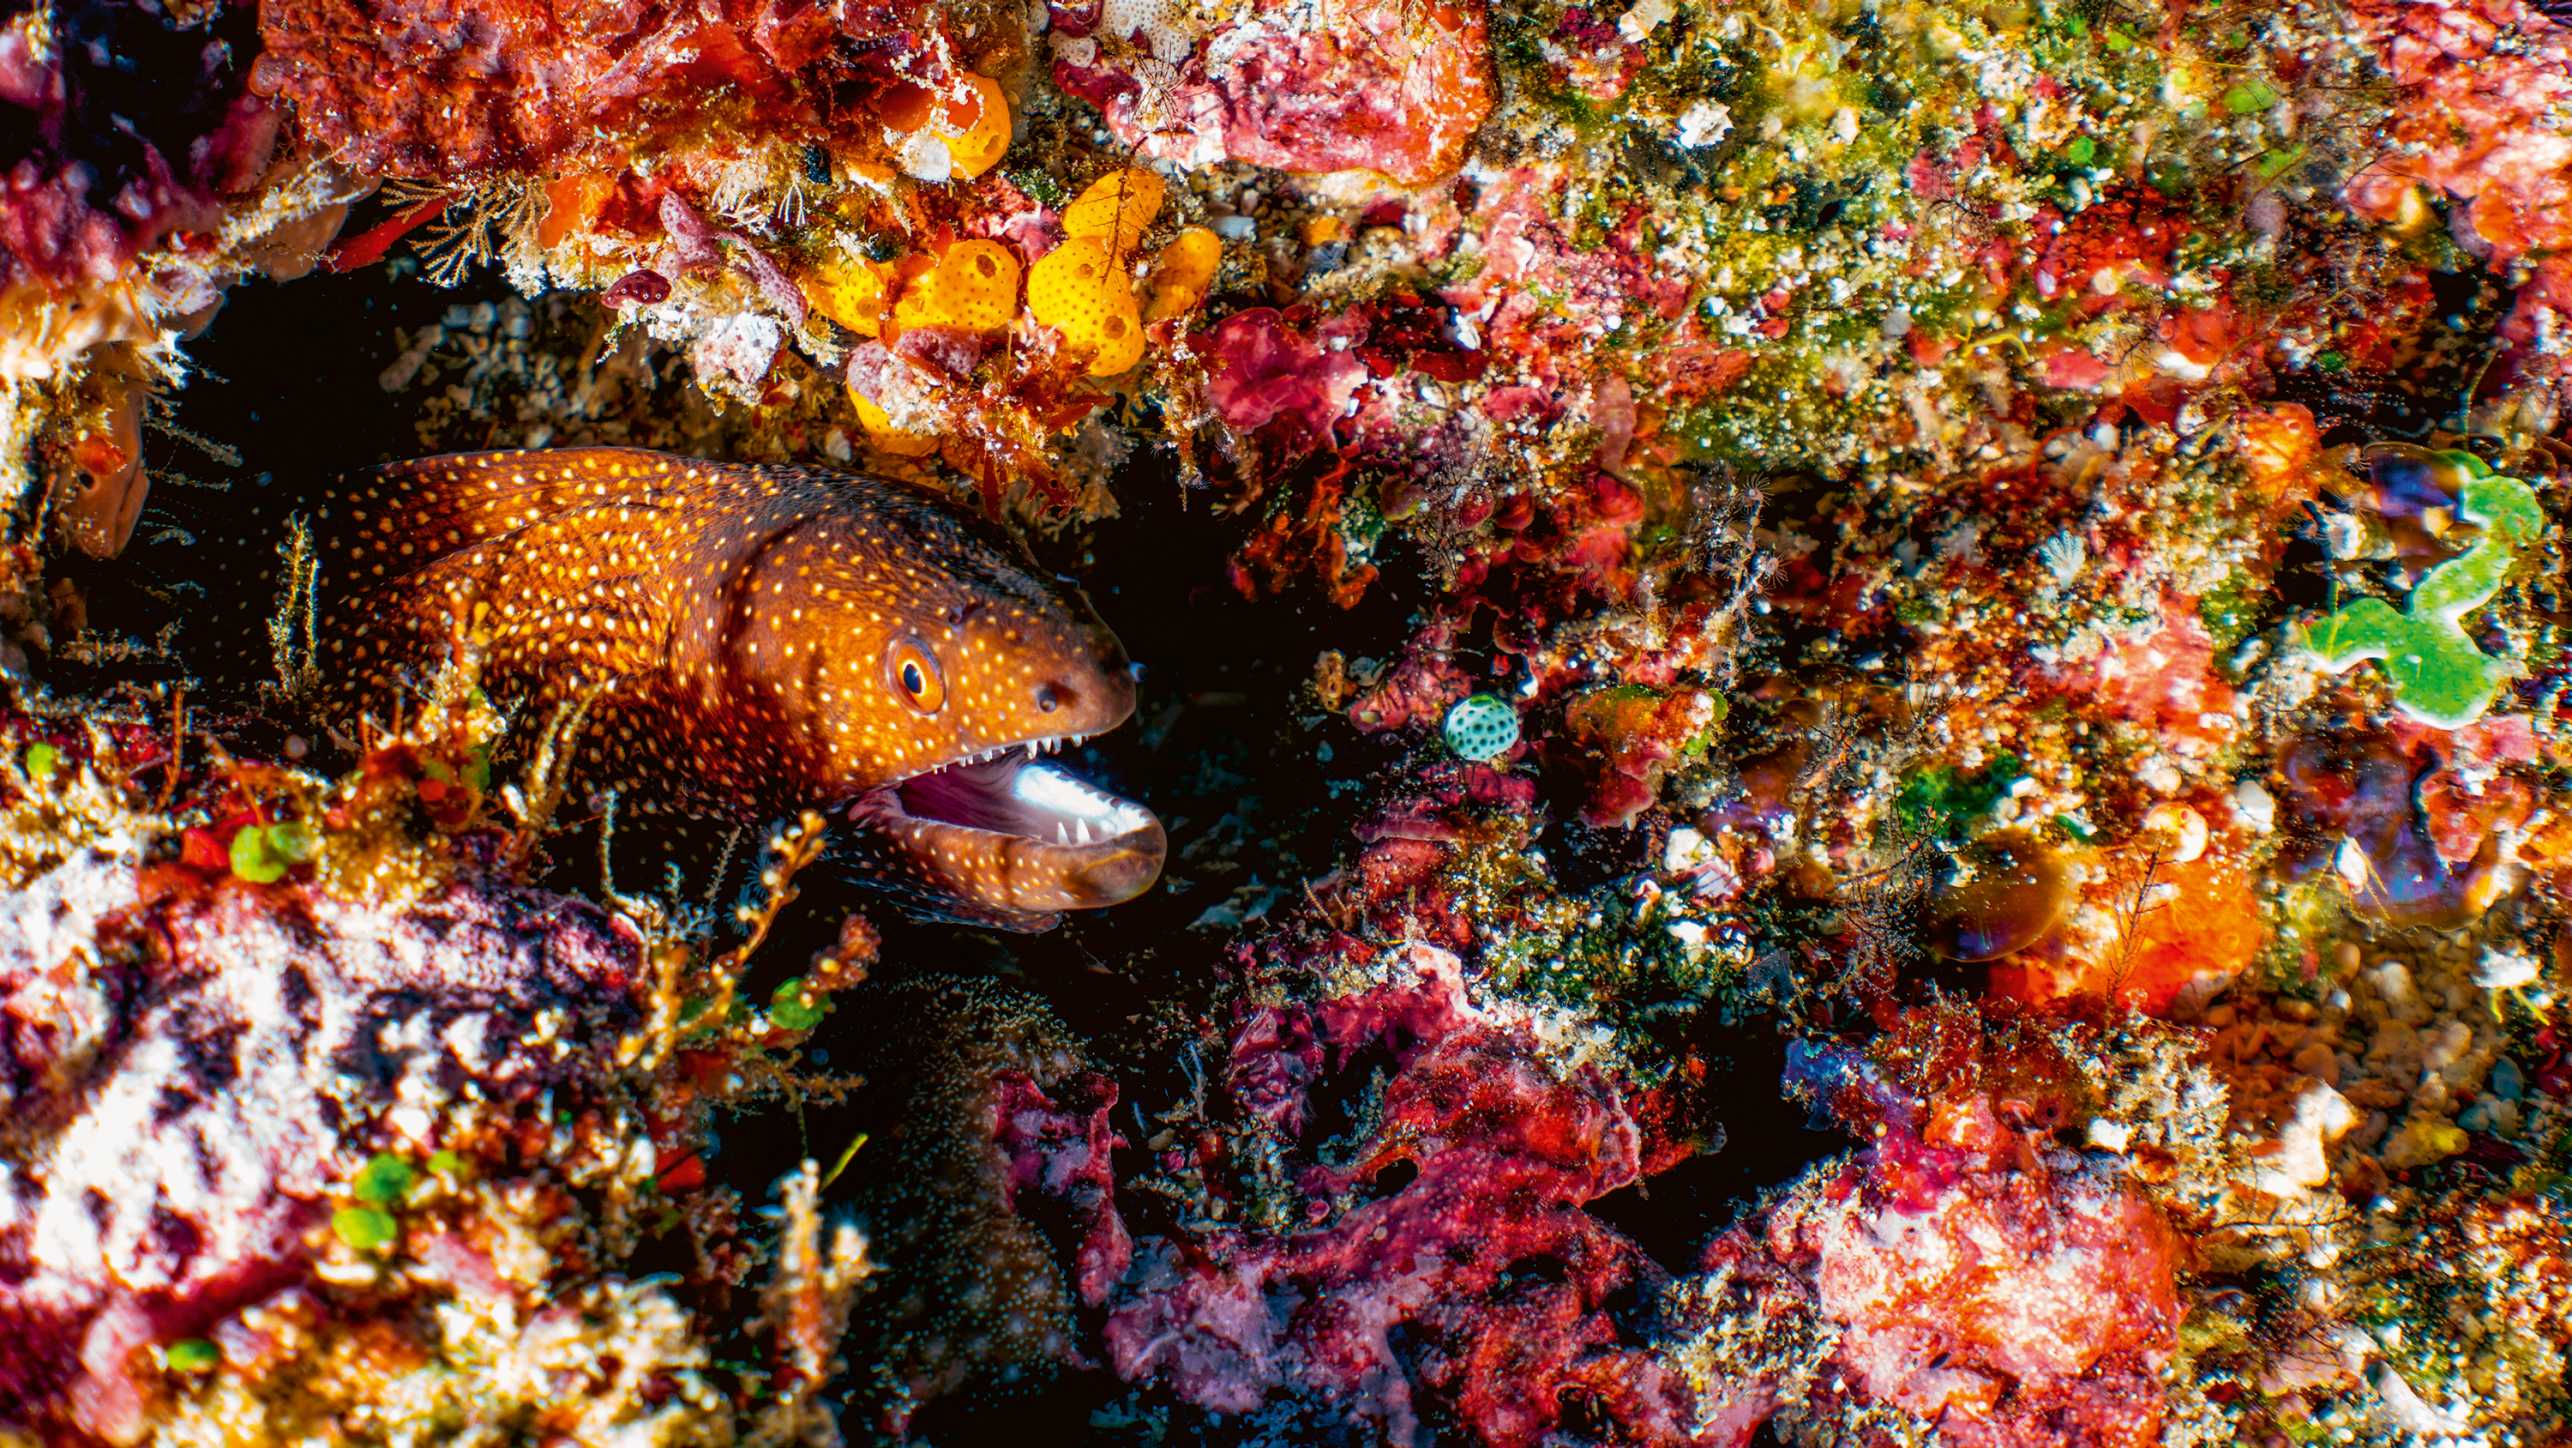 A big brown fish in a coral reef